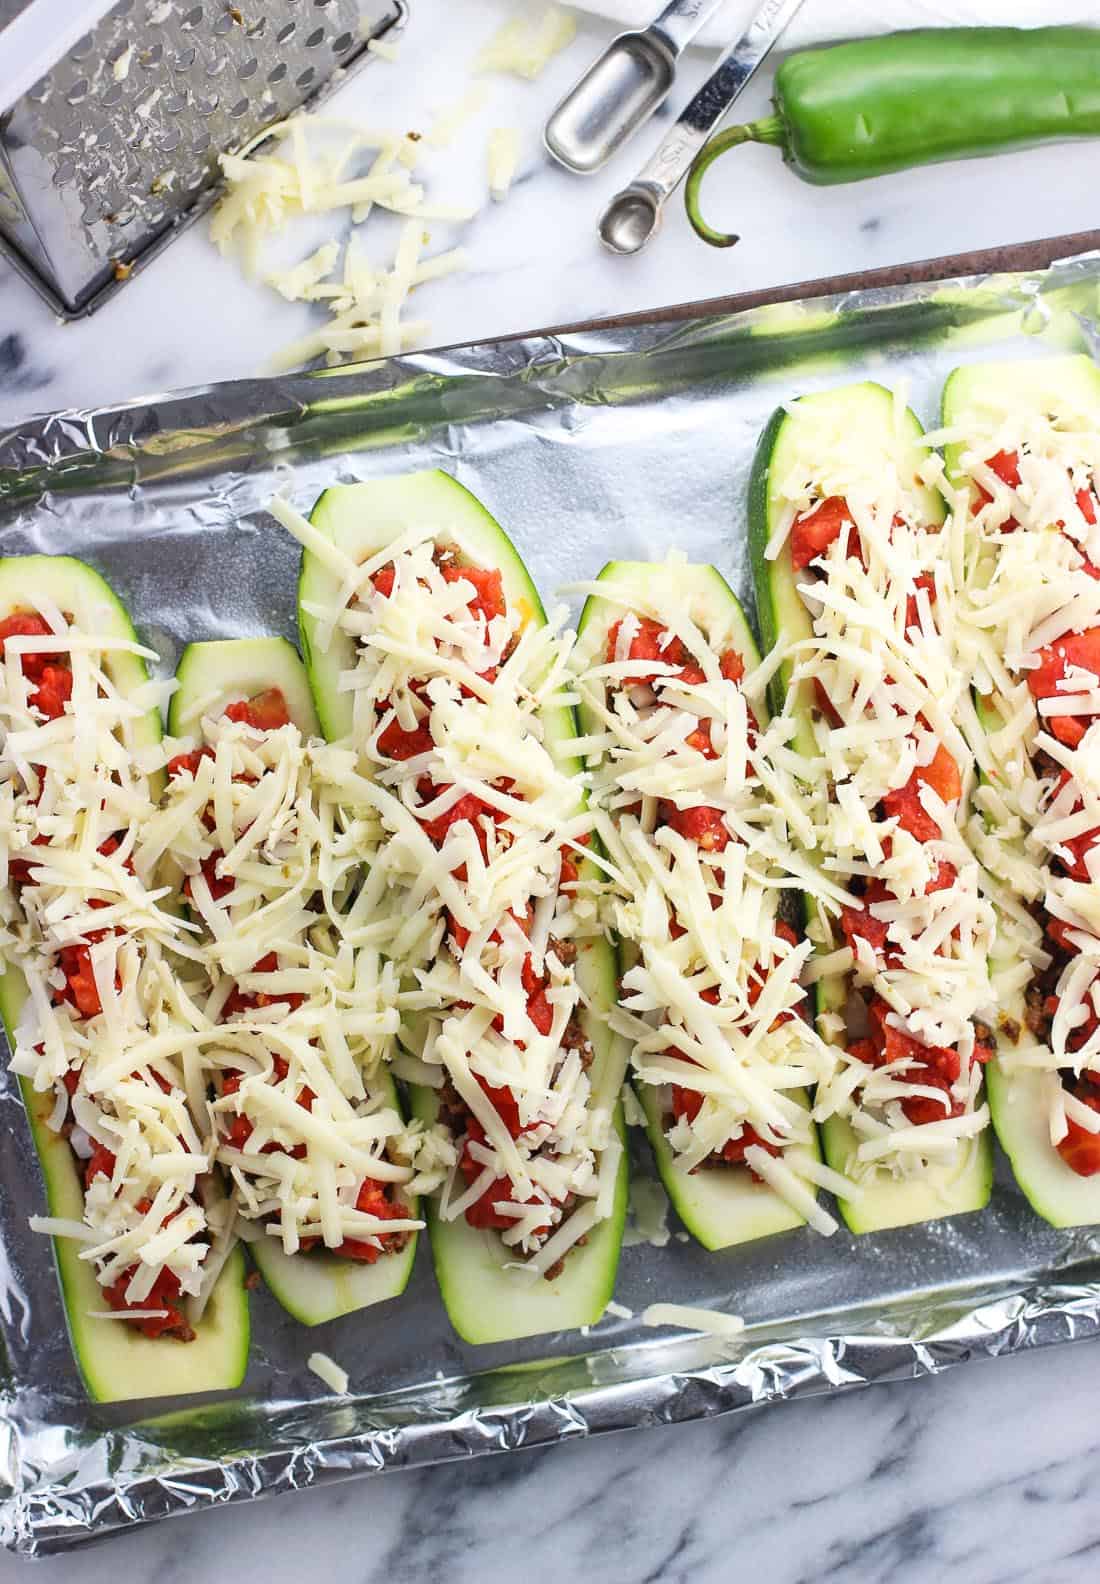 Hollowed out zucchini halves on a foil-lined baking sheet topped with beef, tomatoes, and shredded cheese